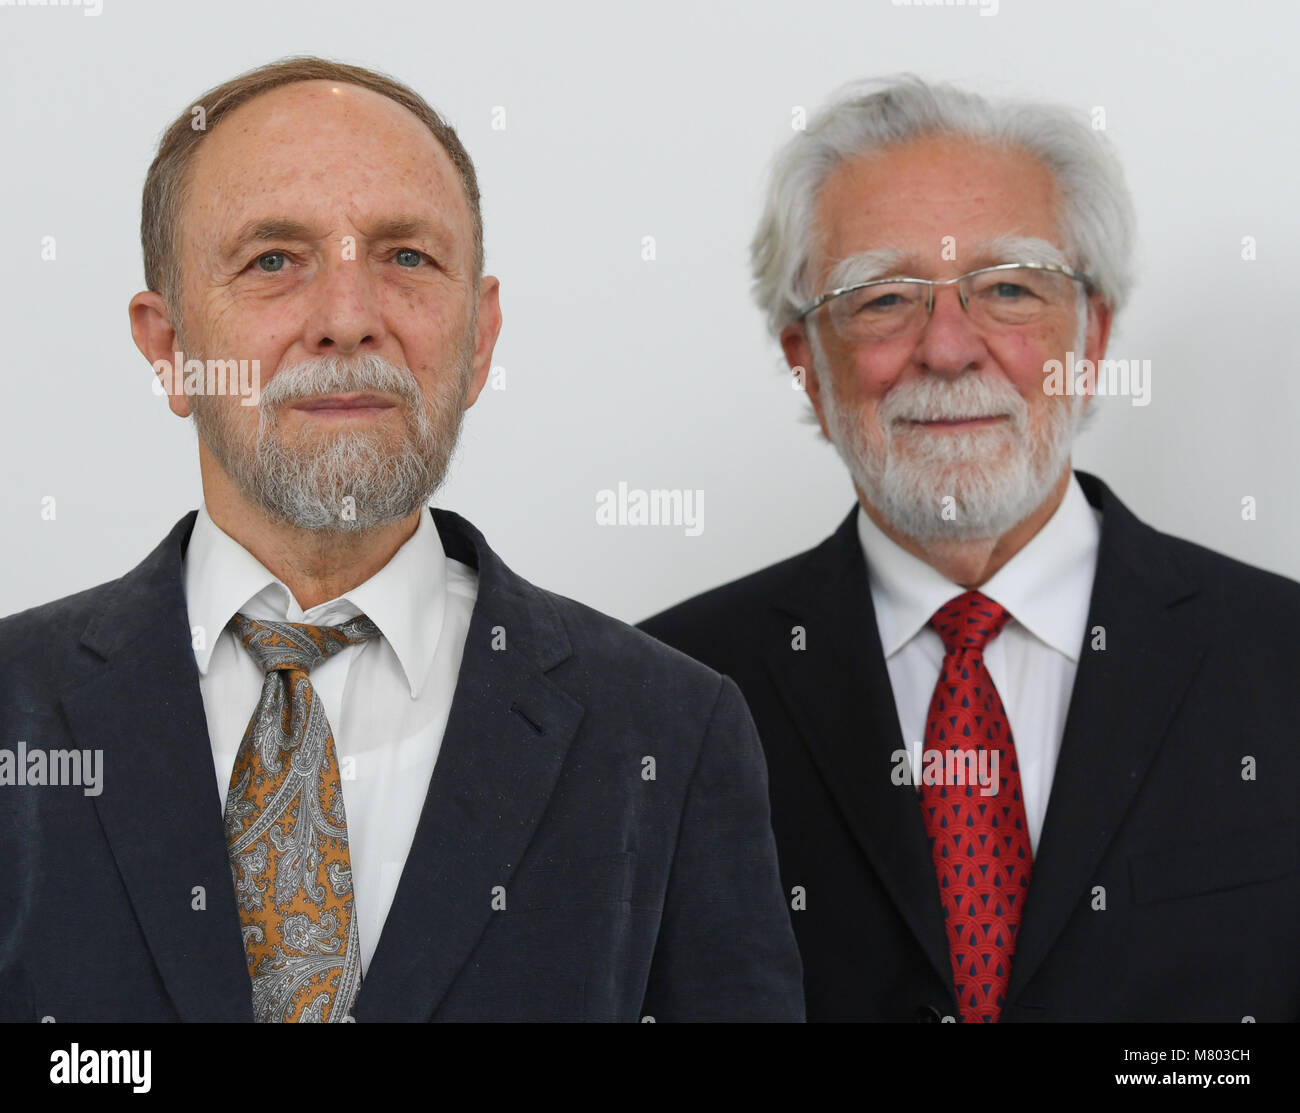 13 March 2018, Langen, Germany: The Israeli David Wallach (L) from the Weizman Institue of Science in Rehovot (Israel) and the American Anthony Cerami, founder of Araim Pharamceuticals in Tarrytown/New York, looking into the camera at the Paul Ehrlich Institute. Cerami and Wallach have deciphered the meaning and signalling effect of the second messenger TNF. Both researchers will be awarded with the Paul Ehrlich and Ludwig Darmstaedter prize on the 14 March 2018. Photo: Arne Dedert/dpa Stock Photo